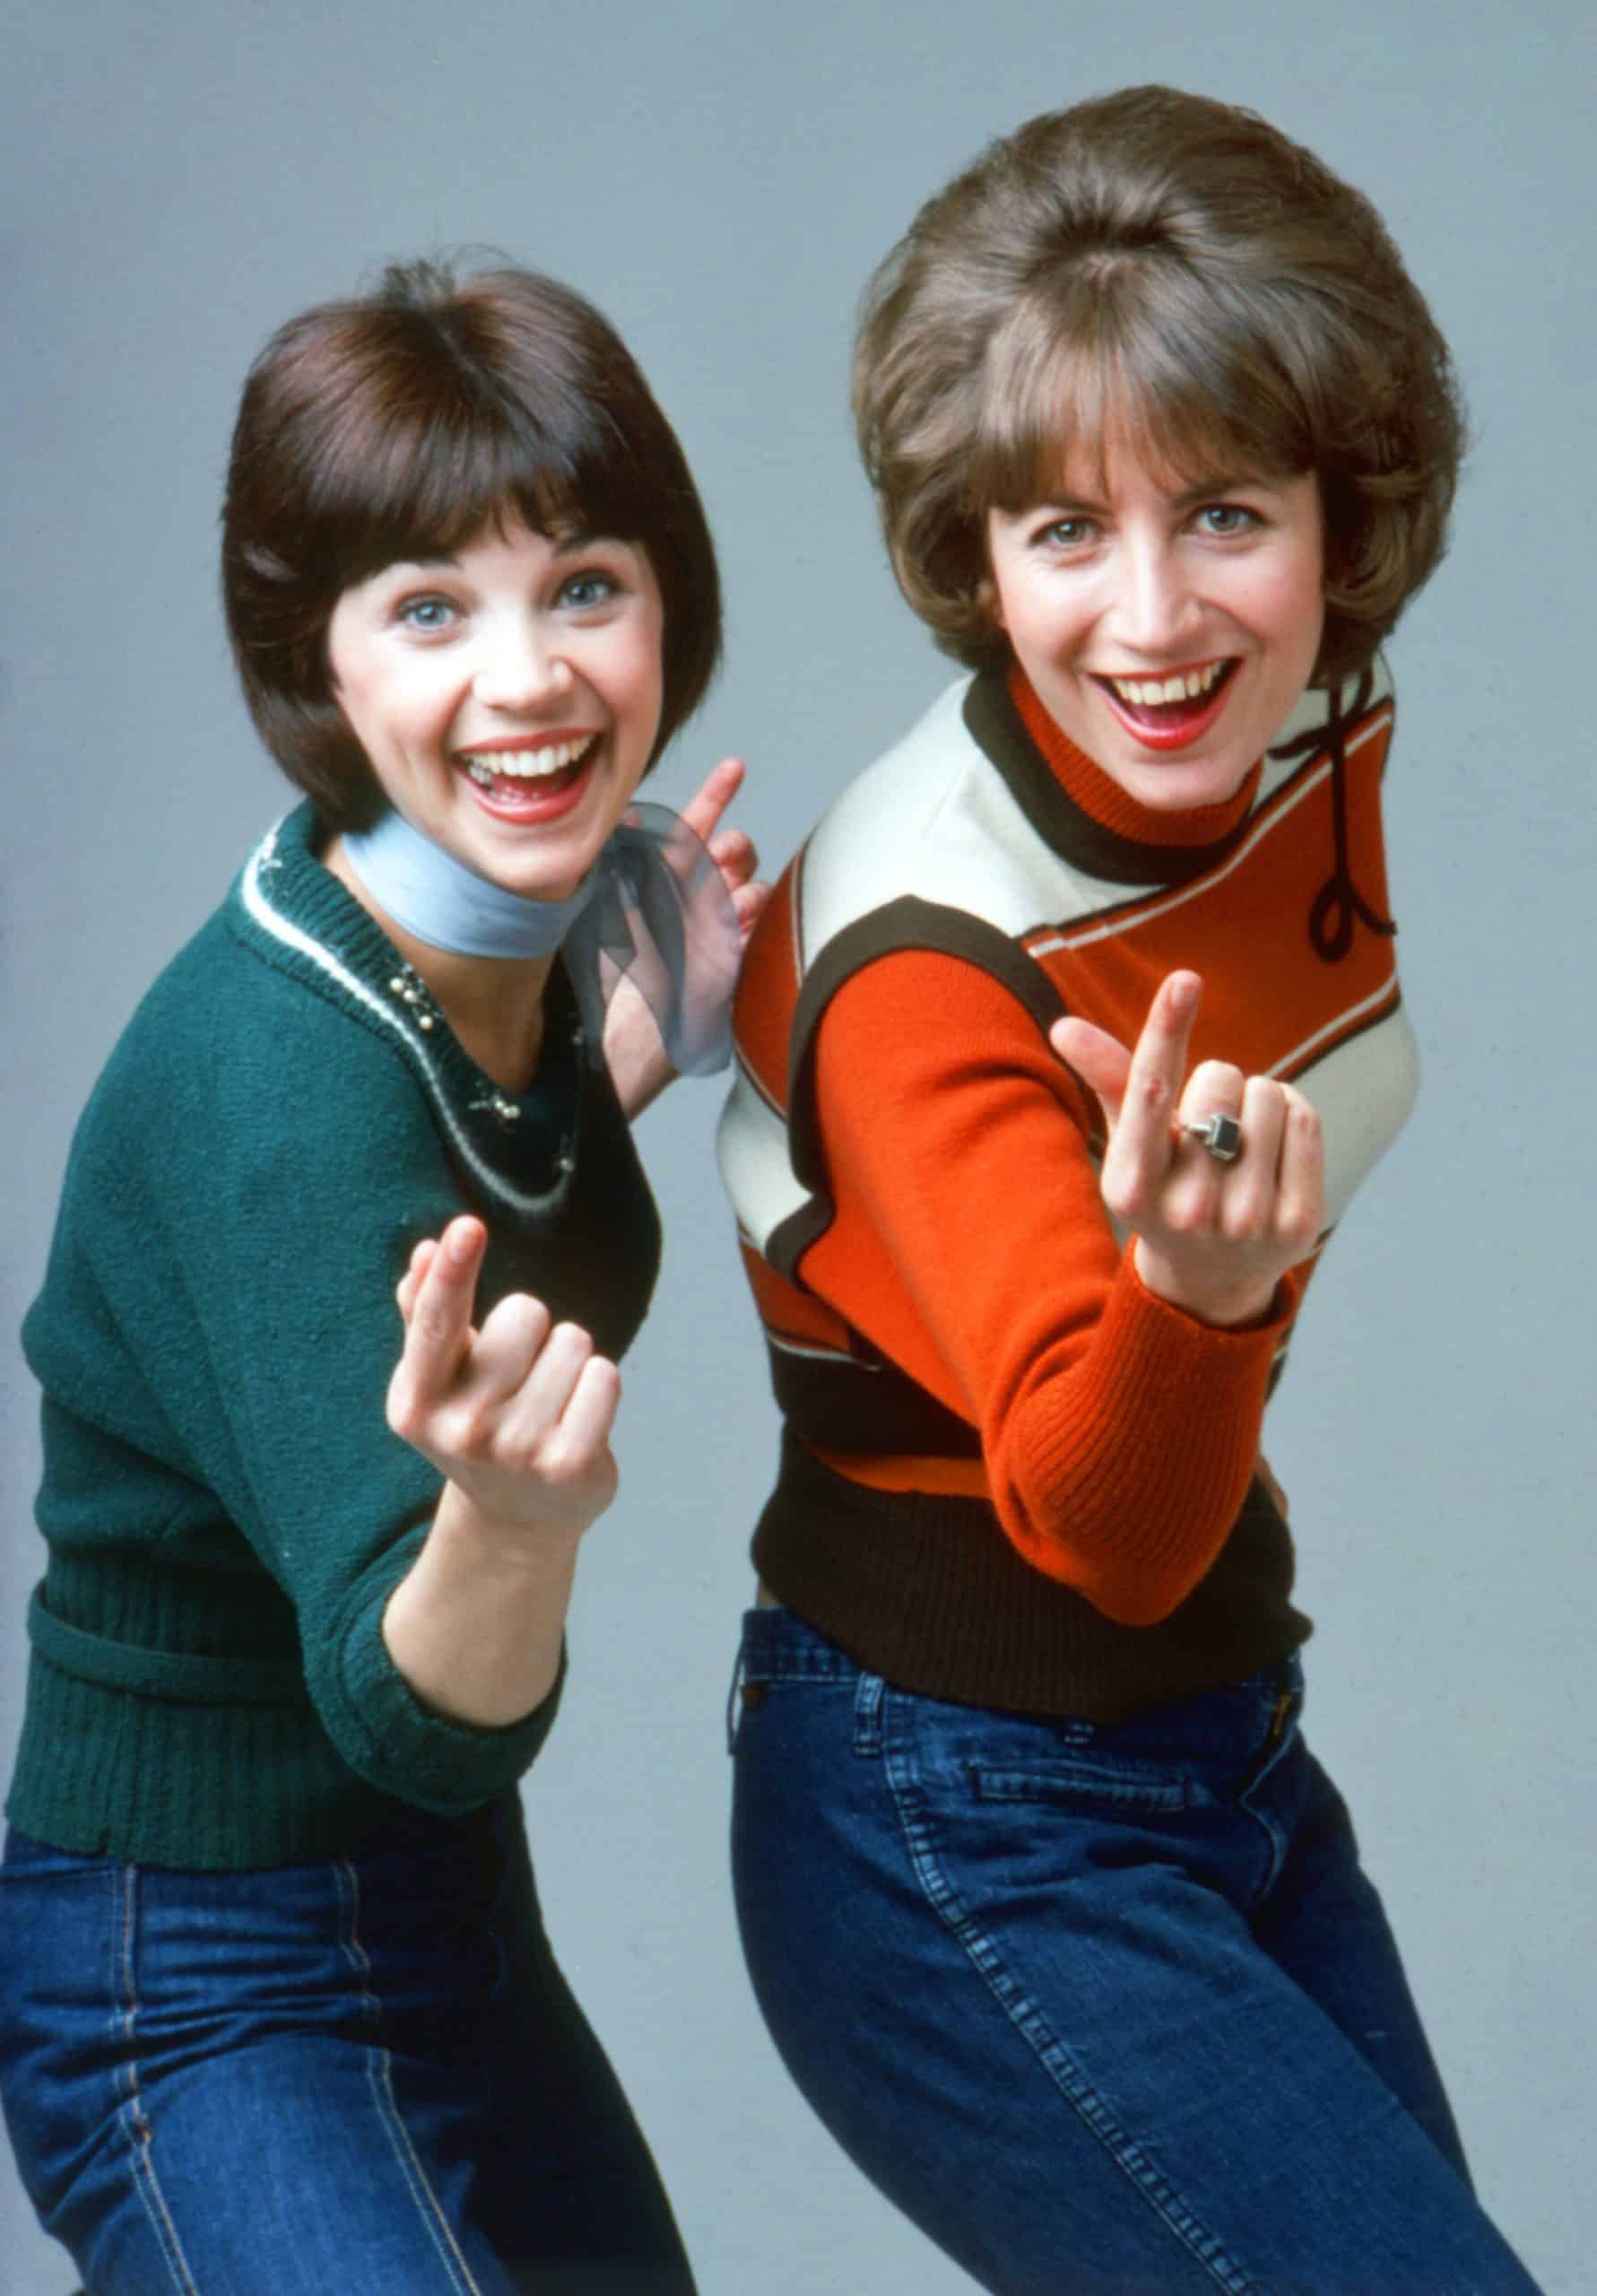 LAVERNE &amp; SHIRLEY, from left: Cindy Williams, Penny Marshall, 1976-1983